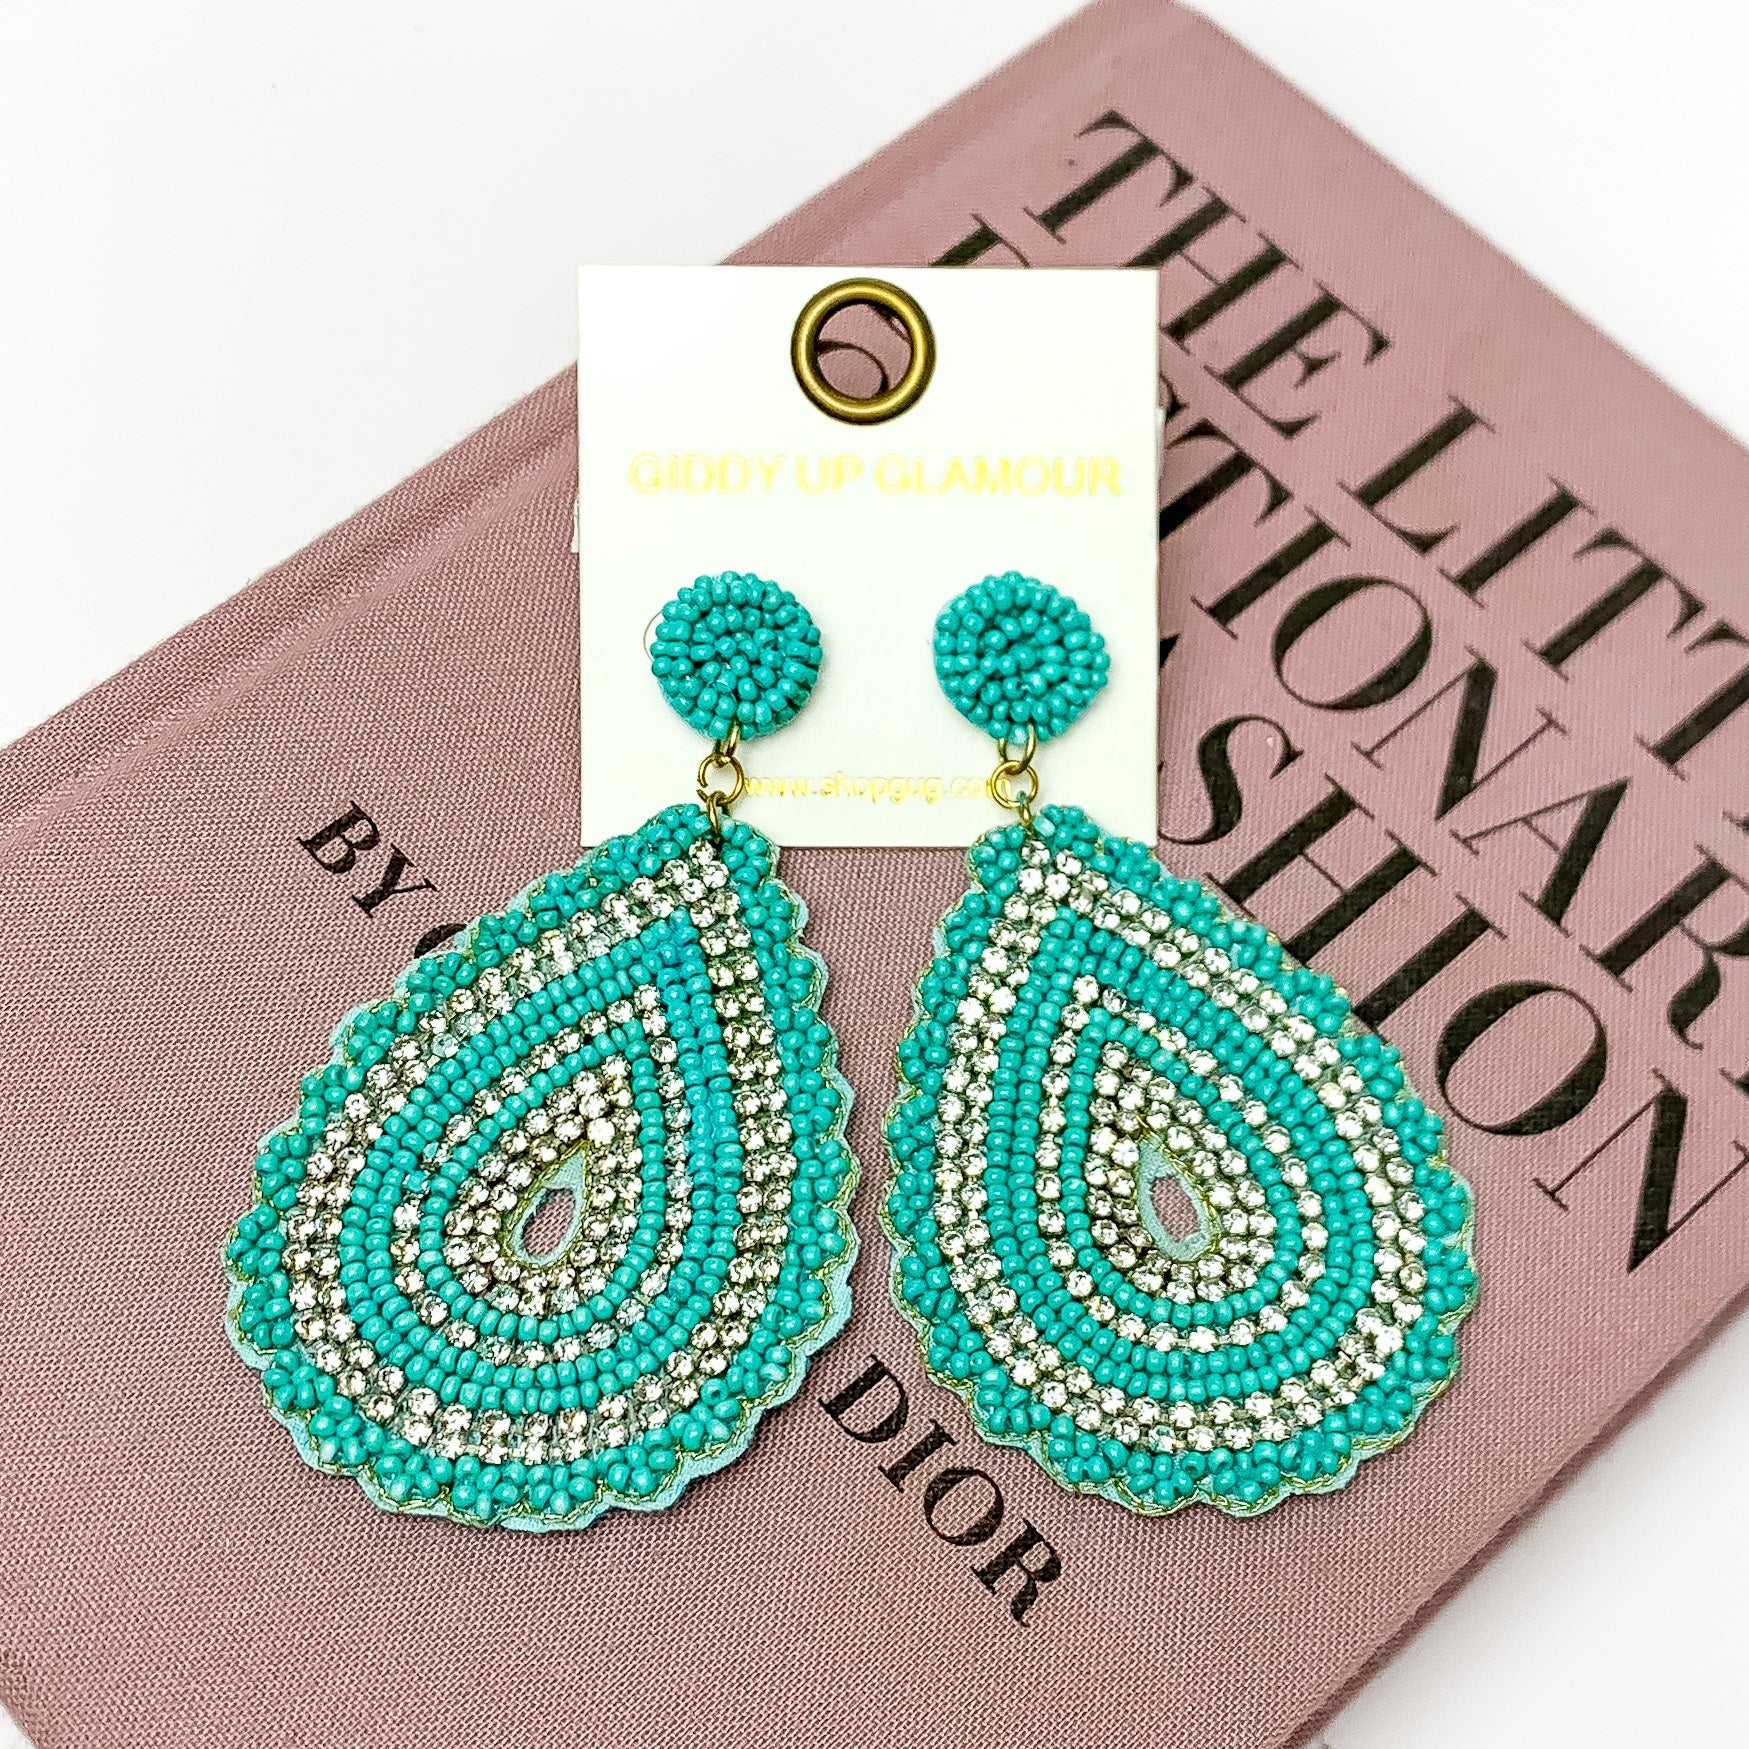 Sound Wave Beaded Teardrop Earrings with Clear Crystals in Turquoise - Giddy Up Glamour Boutique